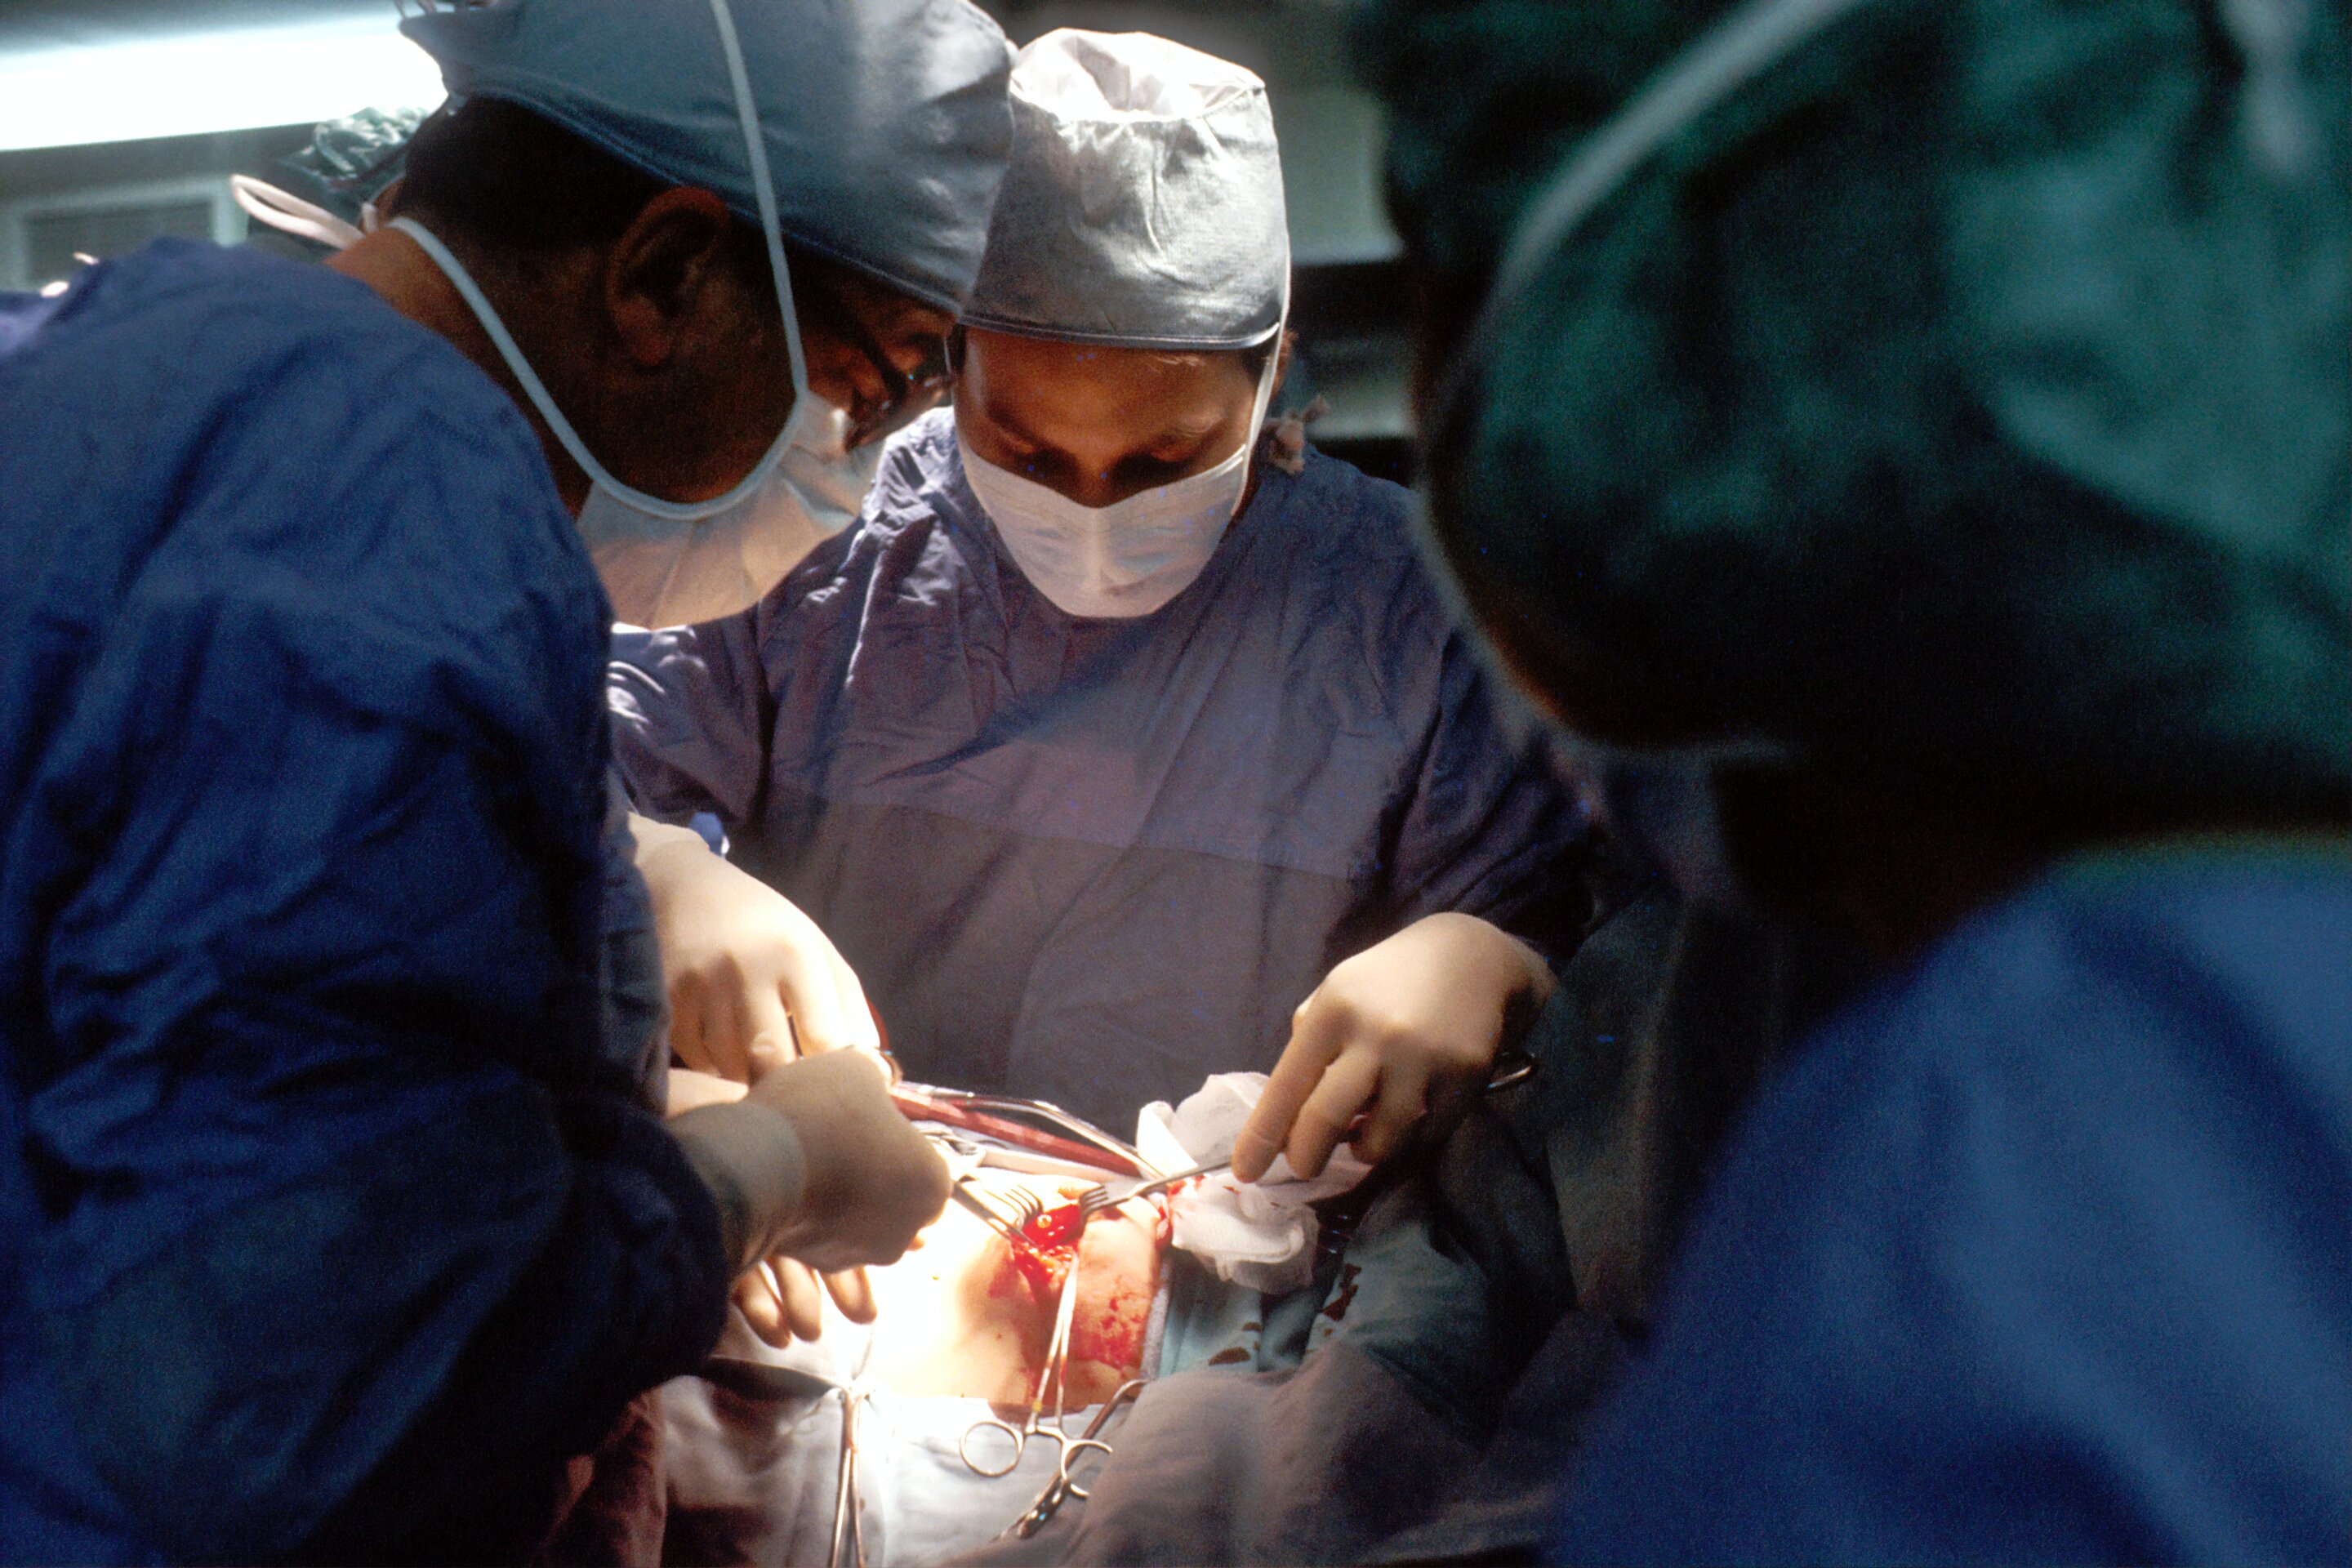 #The timing of heart surgery is crucial, research shows